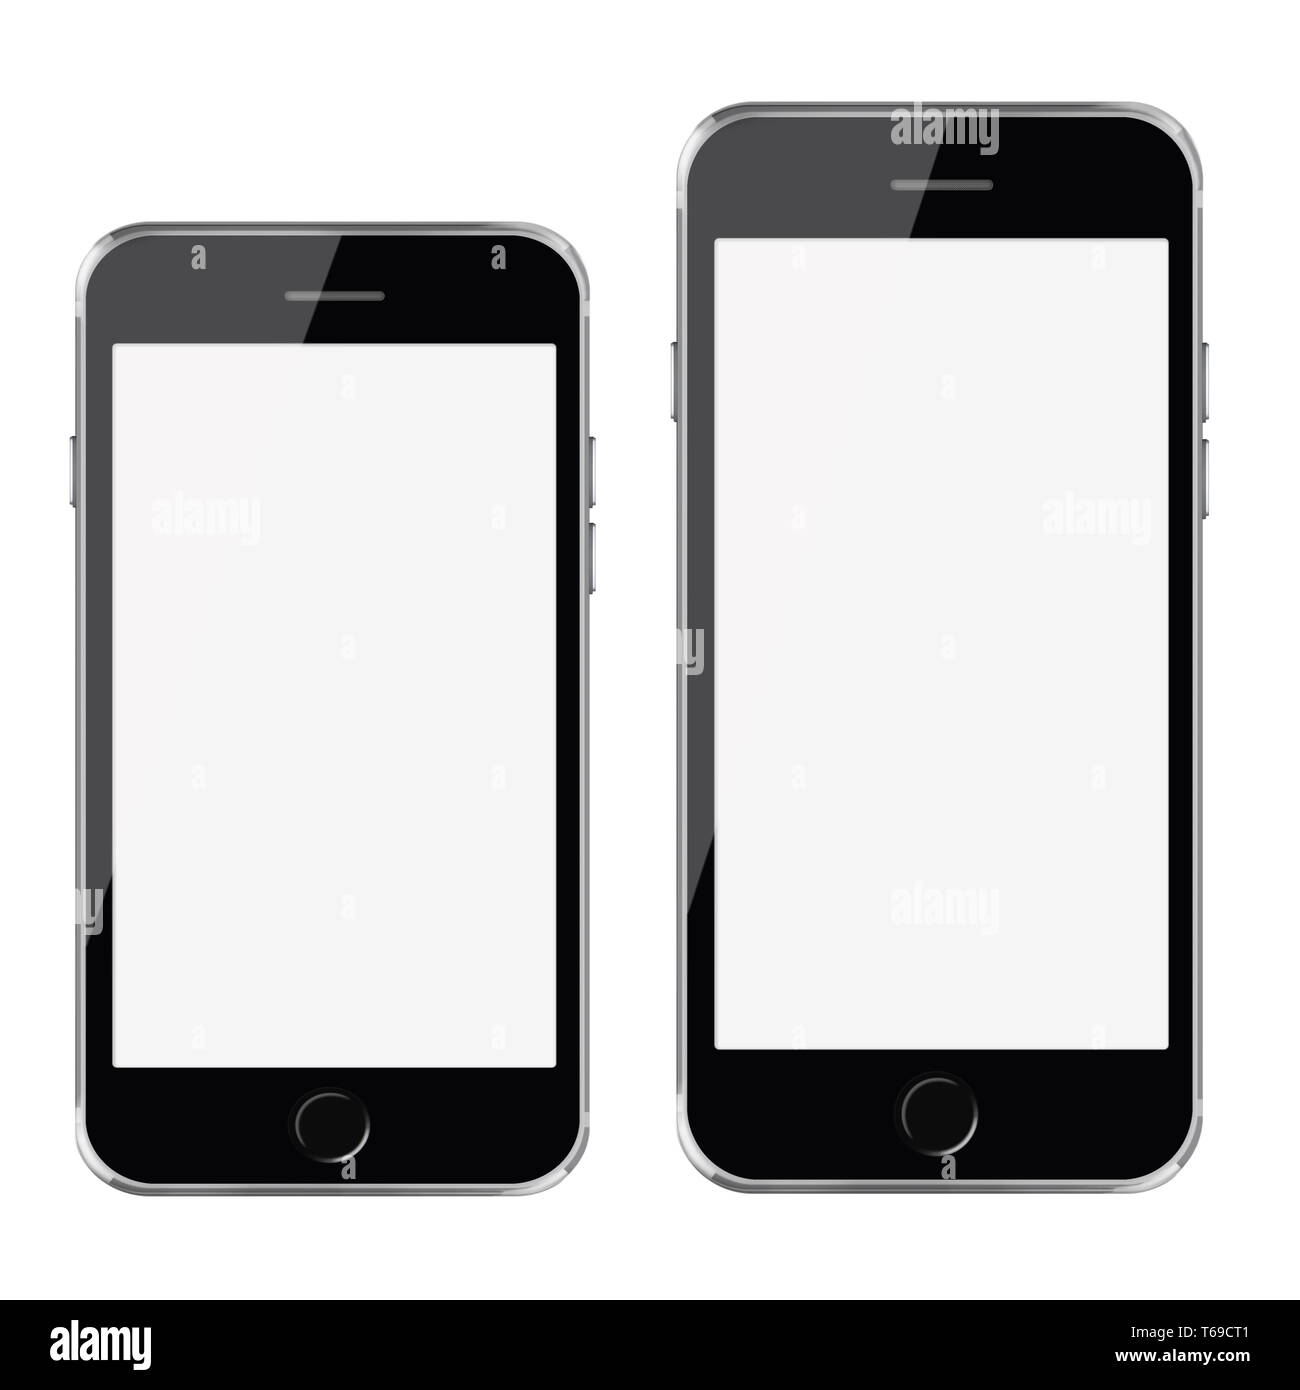 Mobile smart phones with white screen isolated on white background. Stock Photo